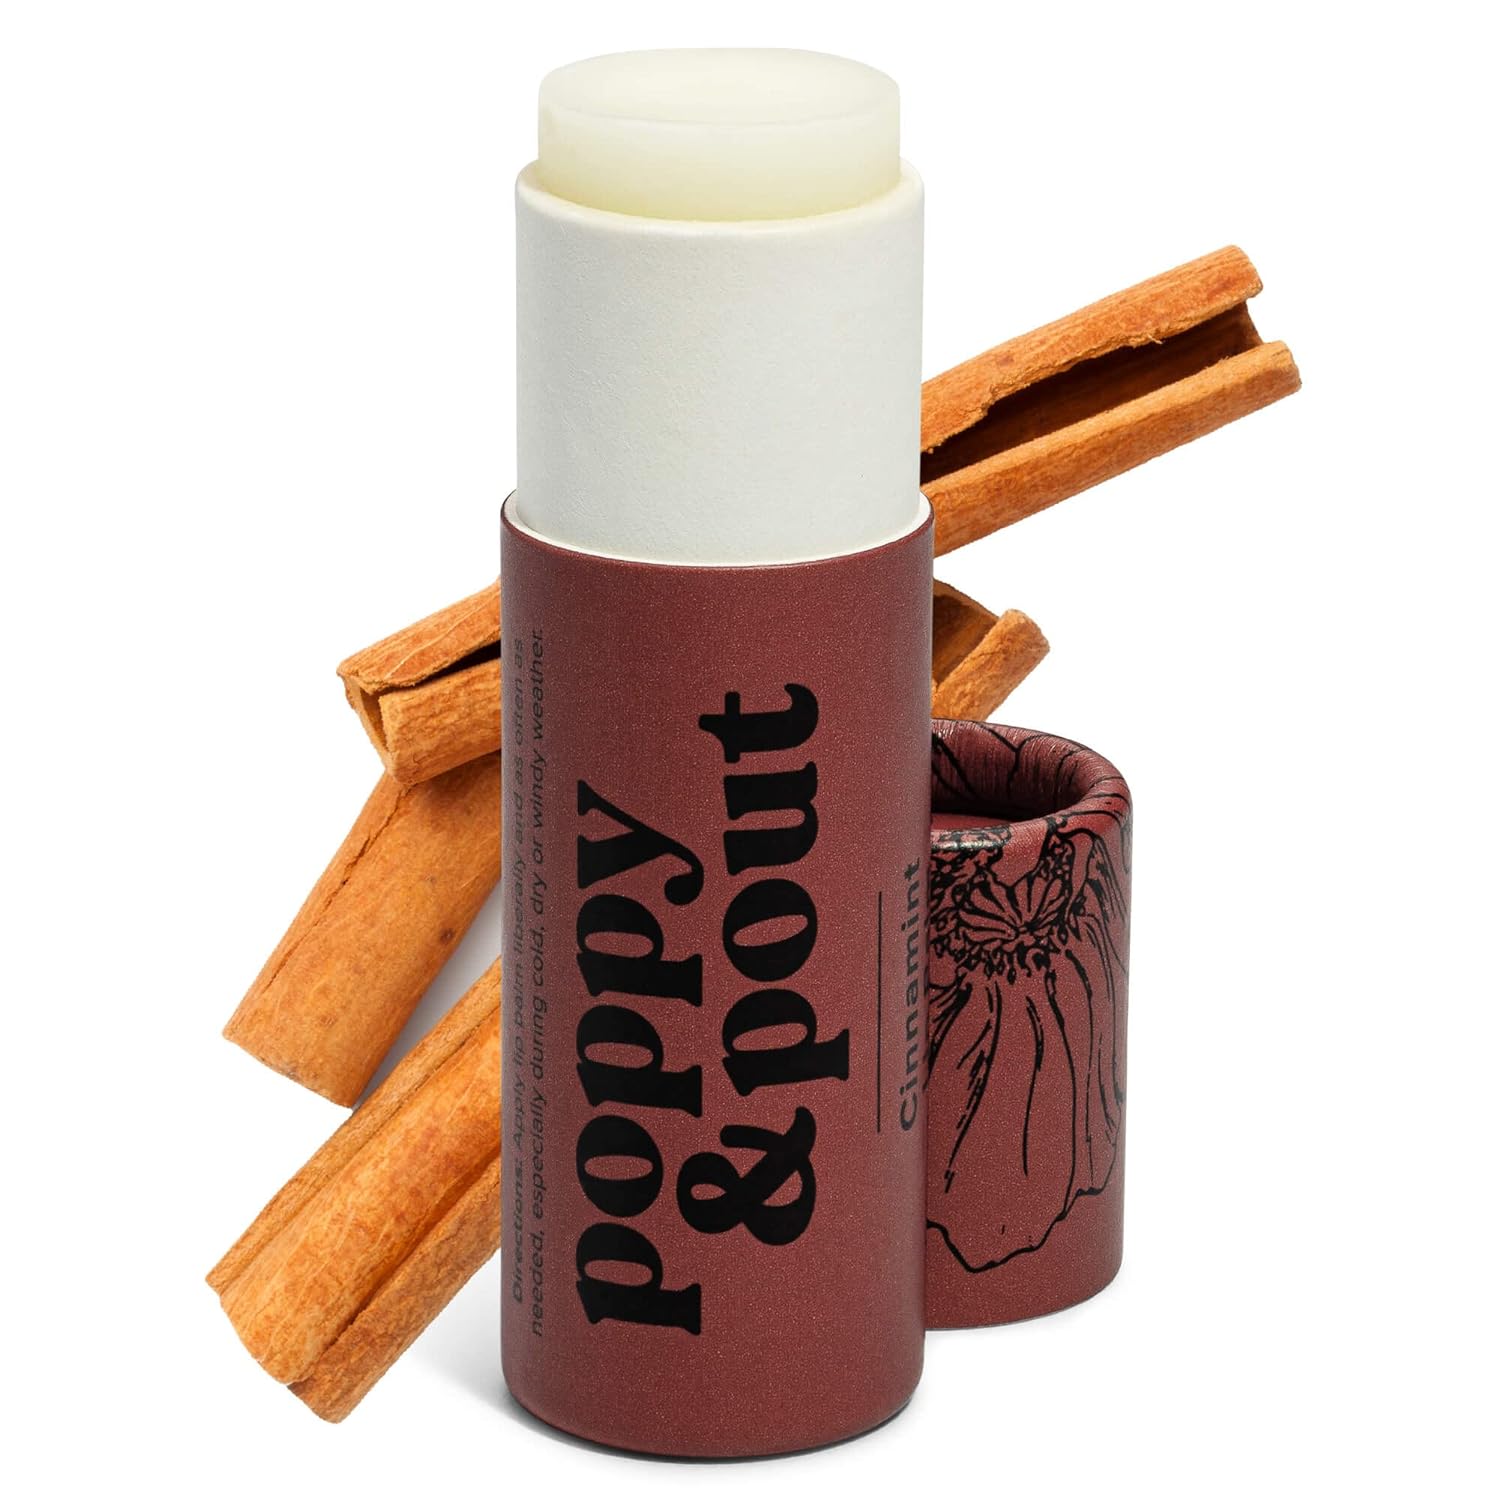 Poppy and Pout Lip Balm - Cinnamint